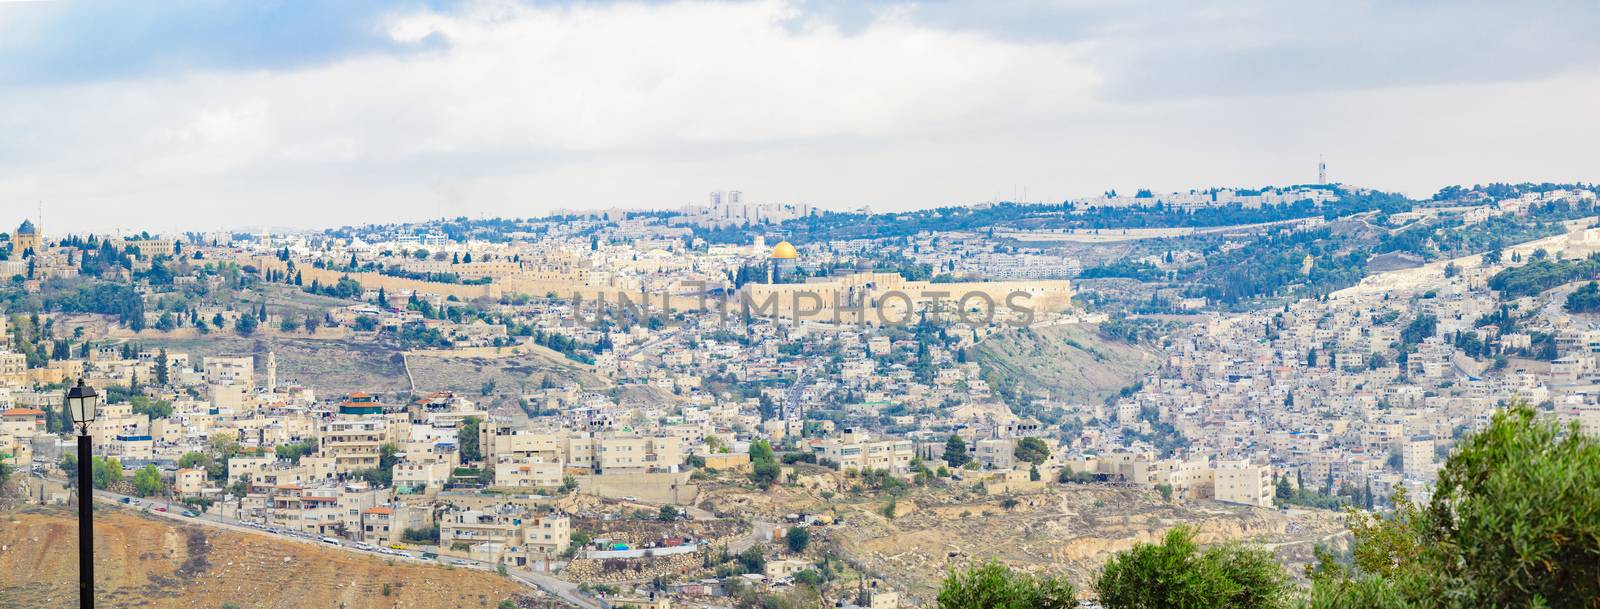 Panoramic view of the old city of Jerusalem from the south, with the walls, al-Aqsa mosque, and the Dormition Abbey. Jerusalem, Israel